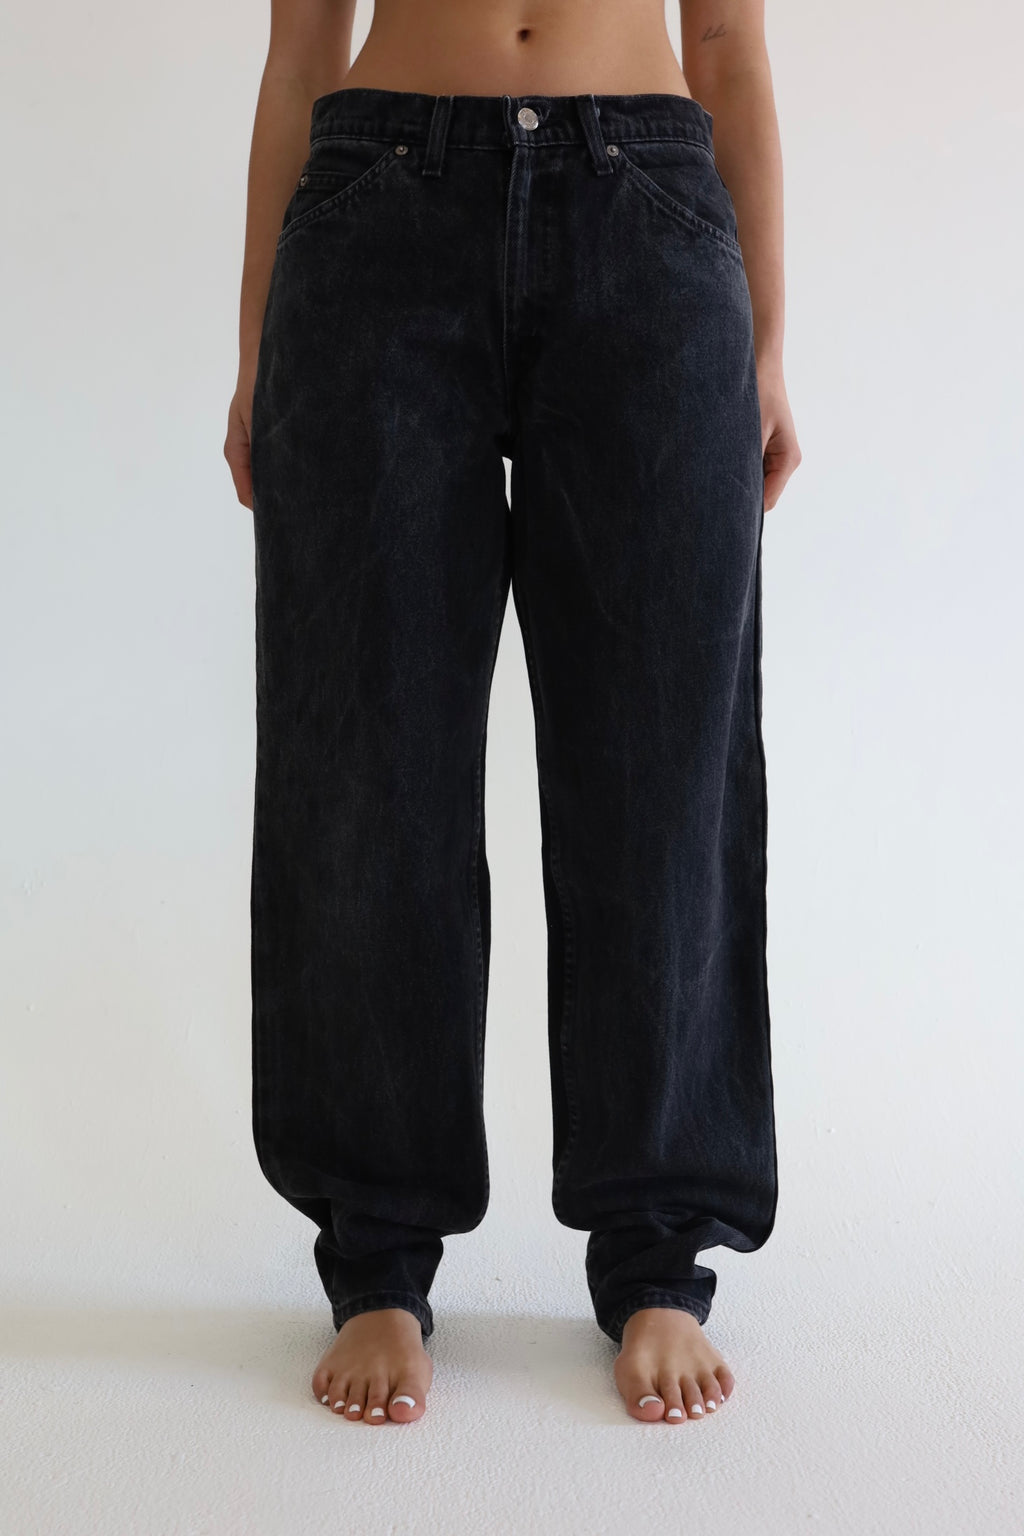 Women's Jeans | Skinny Jean & Mom Jeans | Urban Outfitters UK | Urban  Outfitters UK